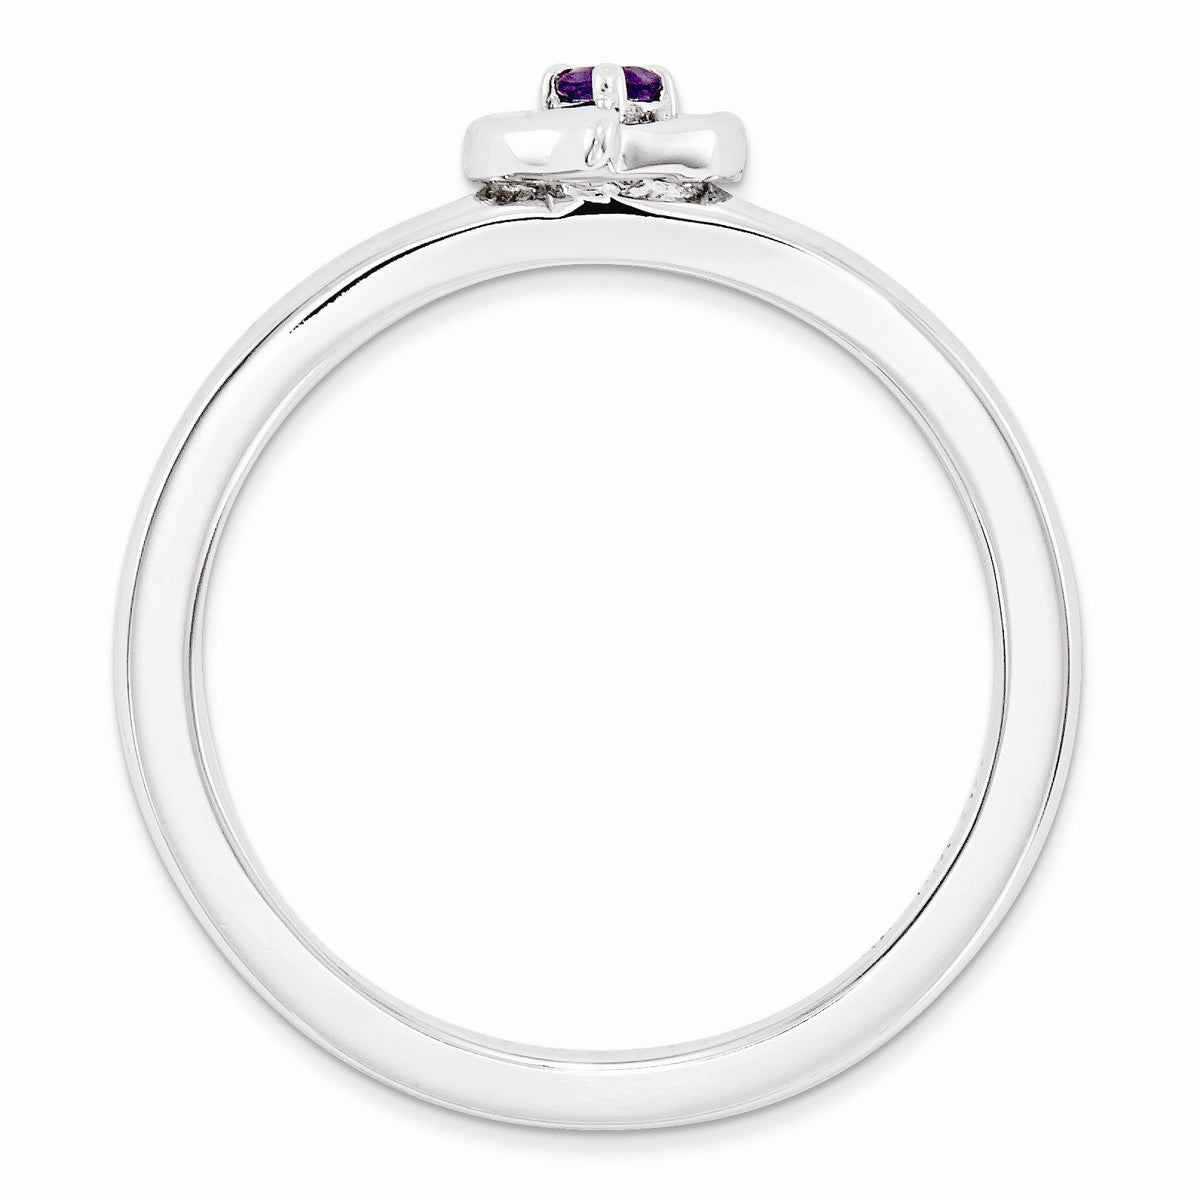 Alternate view of the Sterling Silver Stackable Expressions Amethyst 6mm Heart Ring by The Black Bow Jewelry Co.